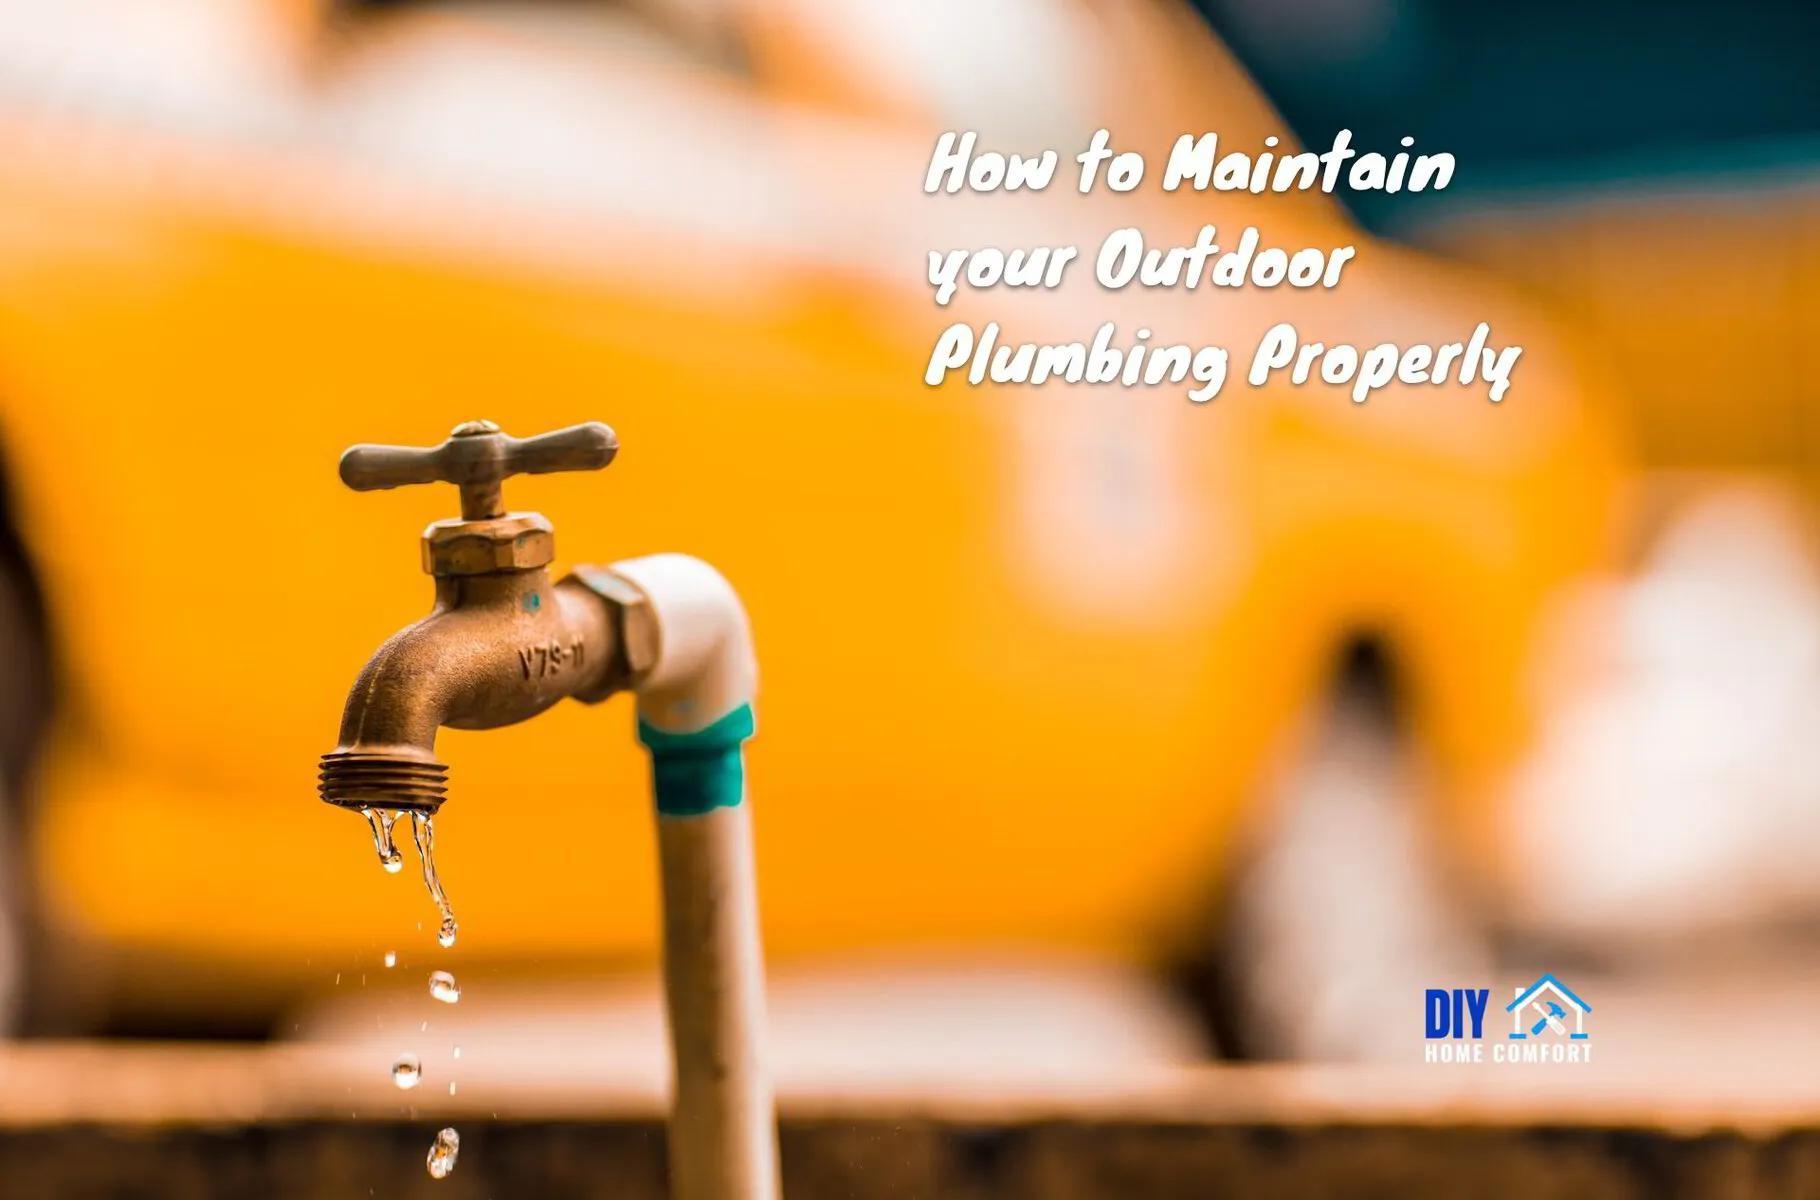 How to Maintain your Outdoor Plumbing Properly | DIY Home Comfort